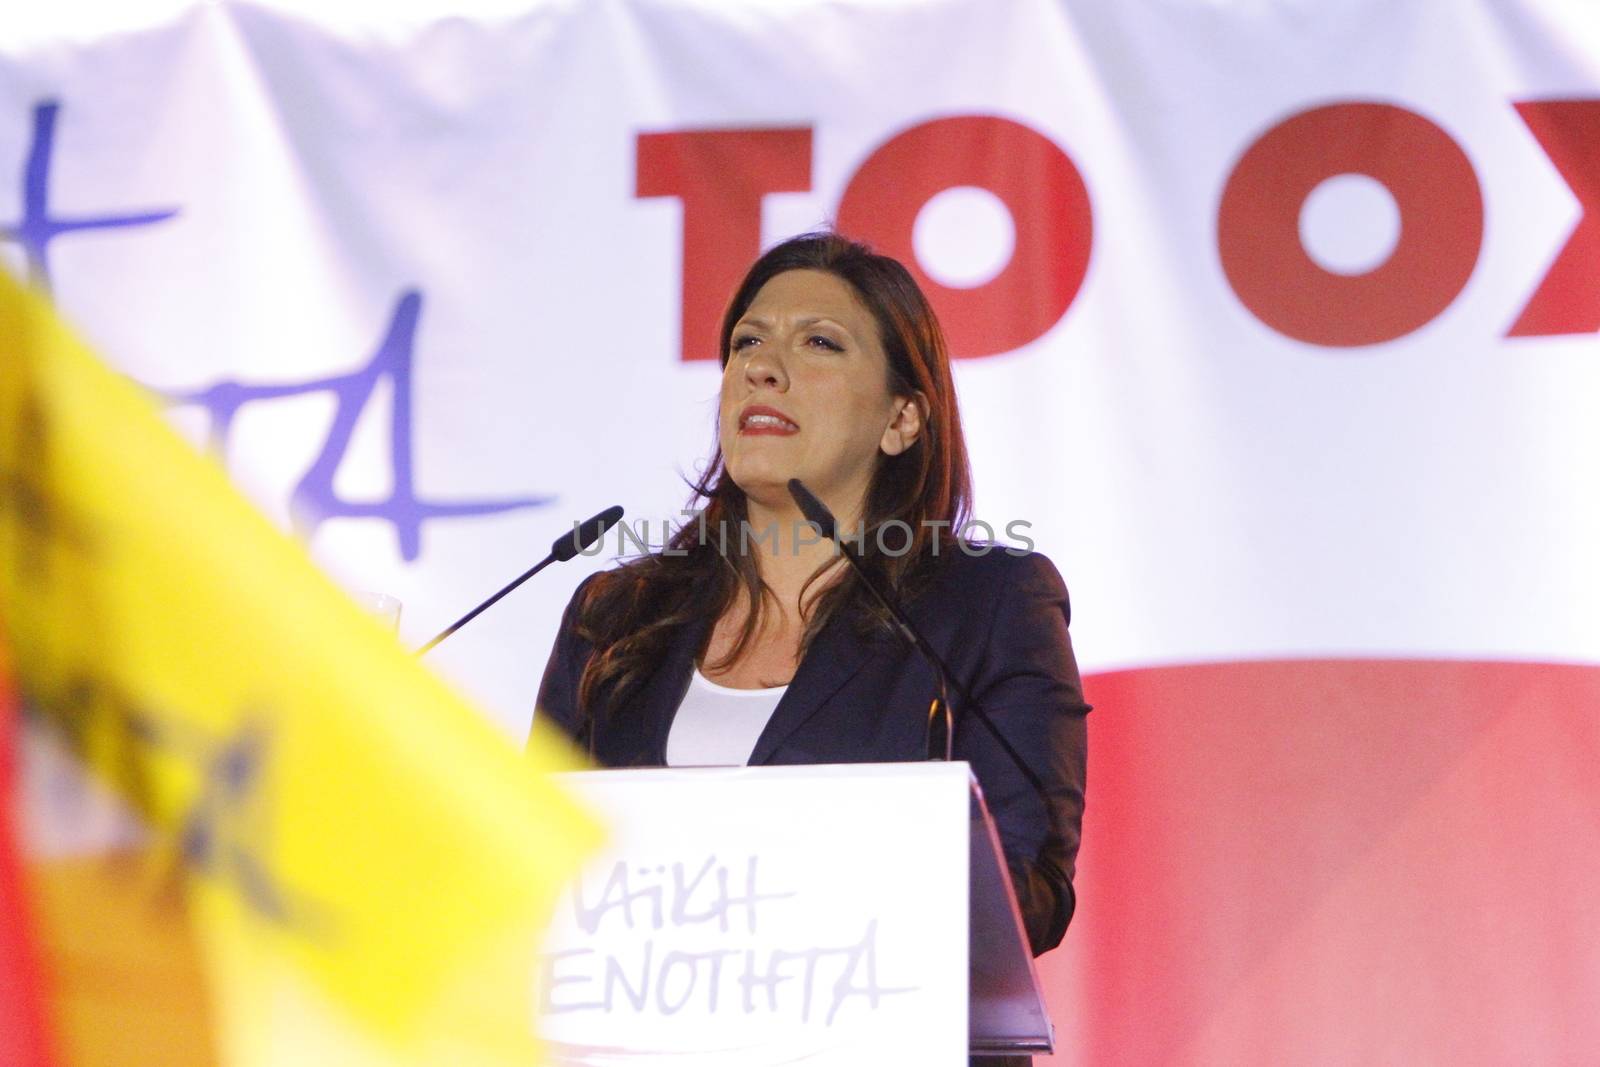 GREECE, Athens: The Speaker of the Hellenic Parliament, Zoe Konstantopoulou, was the key speaker at the final election rally of Popular Unity, the left-wing split-off from the governing Syriza, on September 15, 2015. Syriza called a snap election for September 20 after political turmoil following the negotiation of a further bailout packages from Greece's creditors.